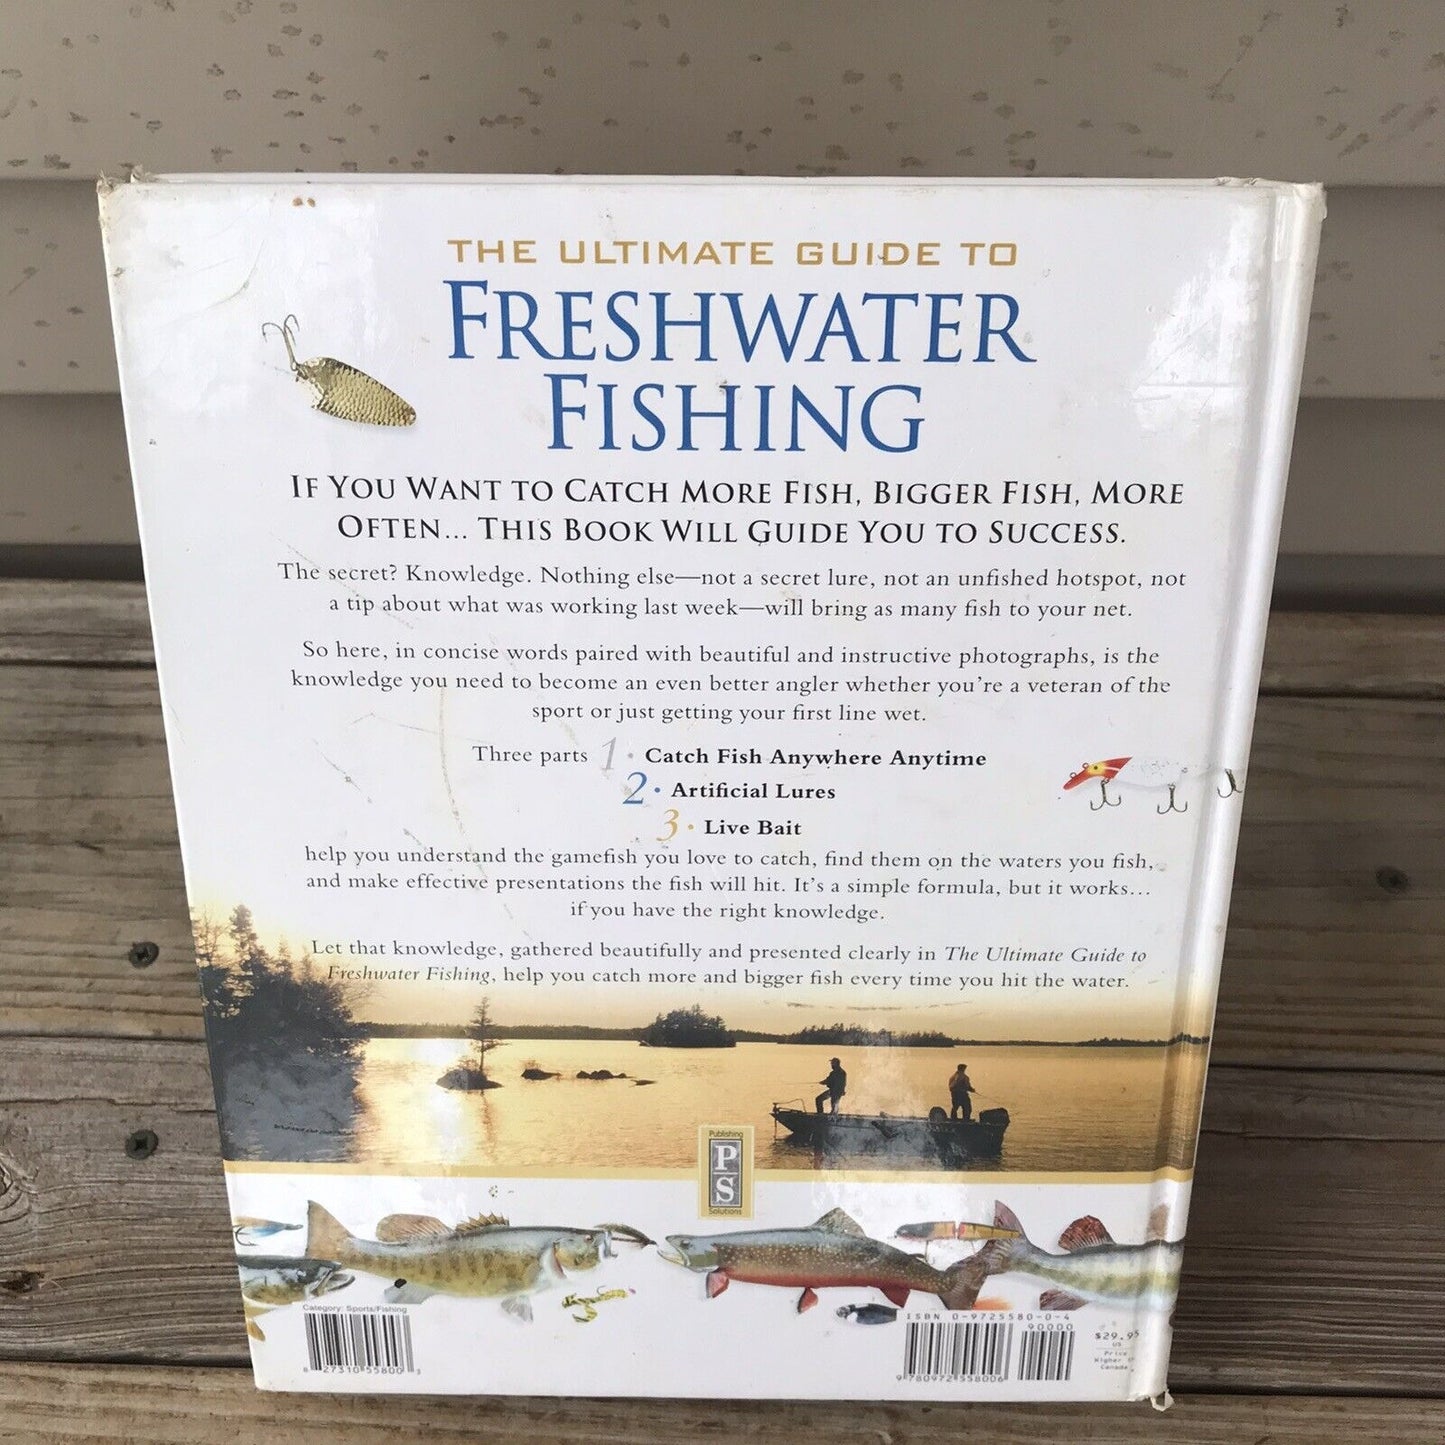 “The Ultimate Guide to Freshwater Fishing” Book